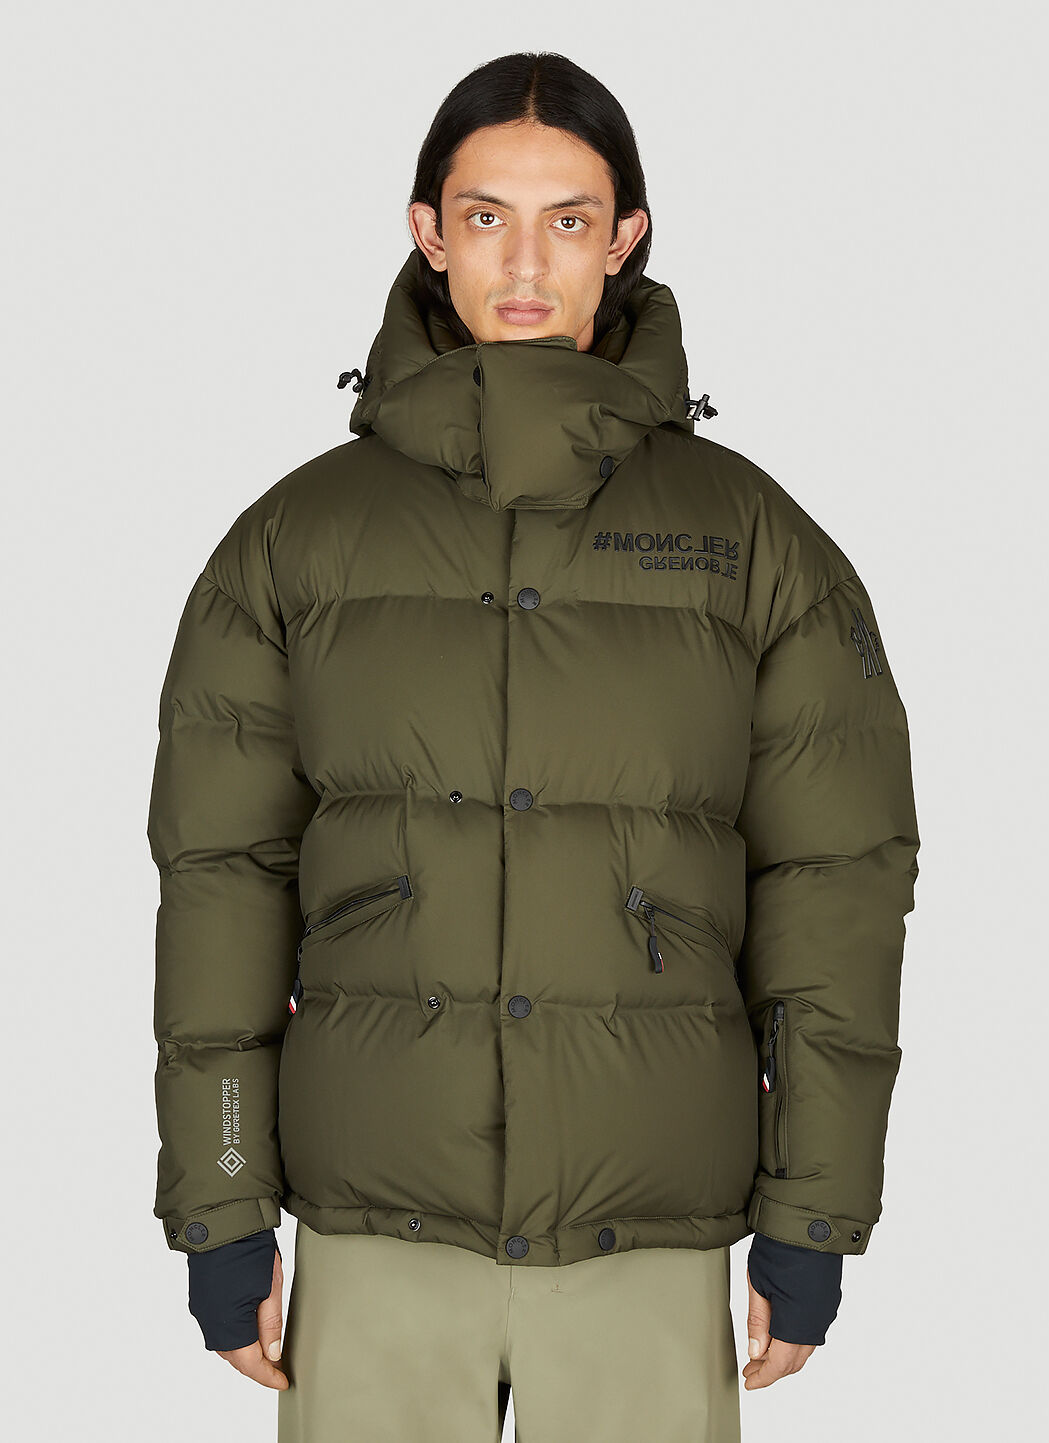 Moncler x Roc Nation designed by Jay-Z Coraia Hooded Puffer Jacket Beige mrn0156001